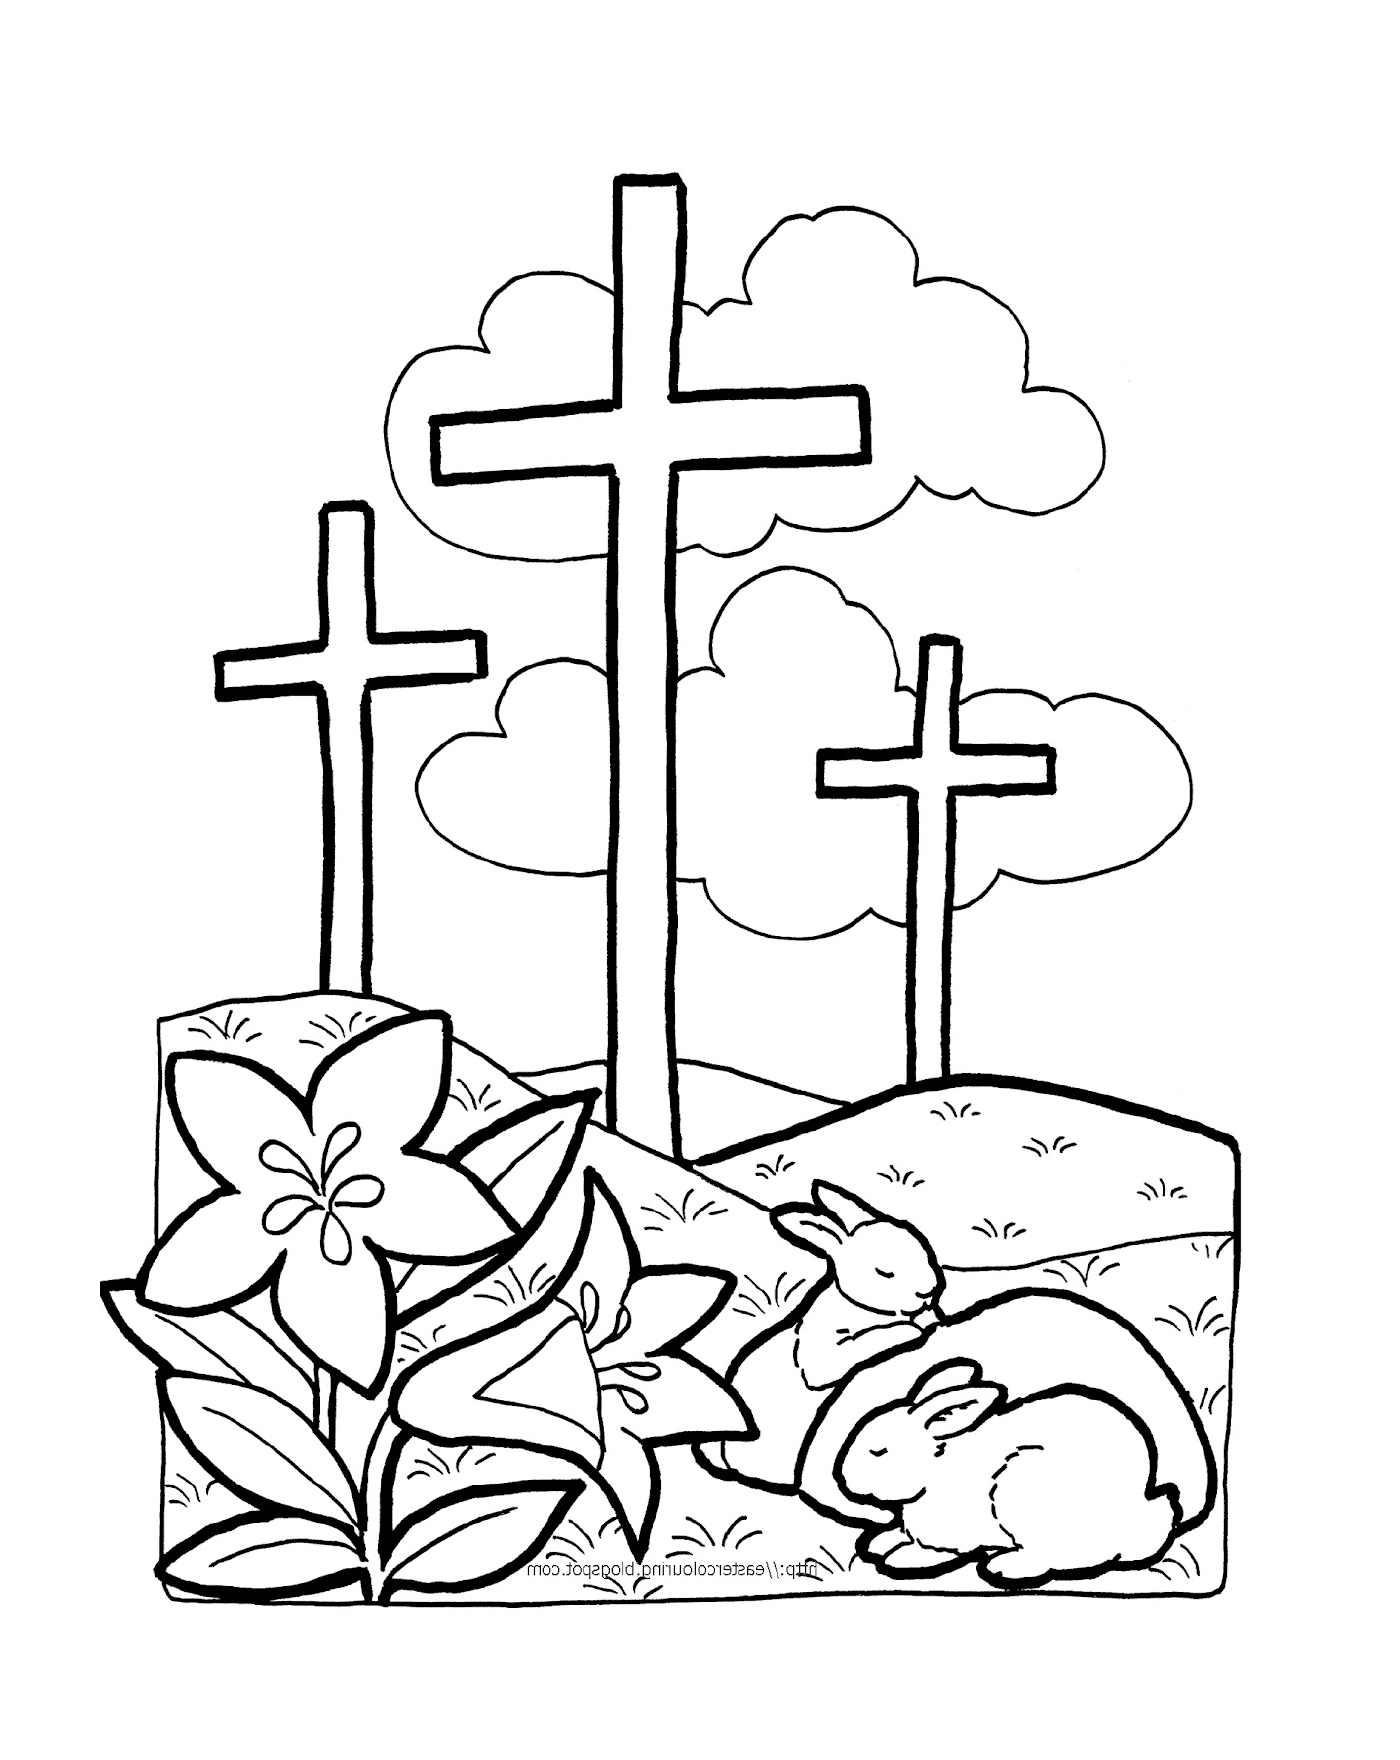  A cross and flowers 